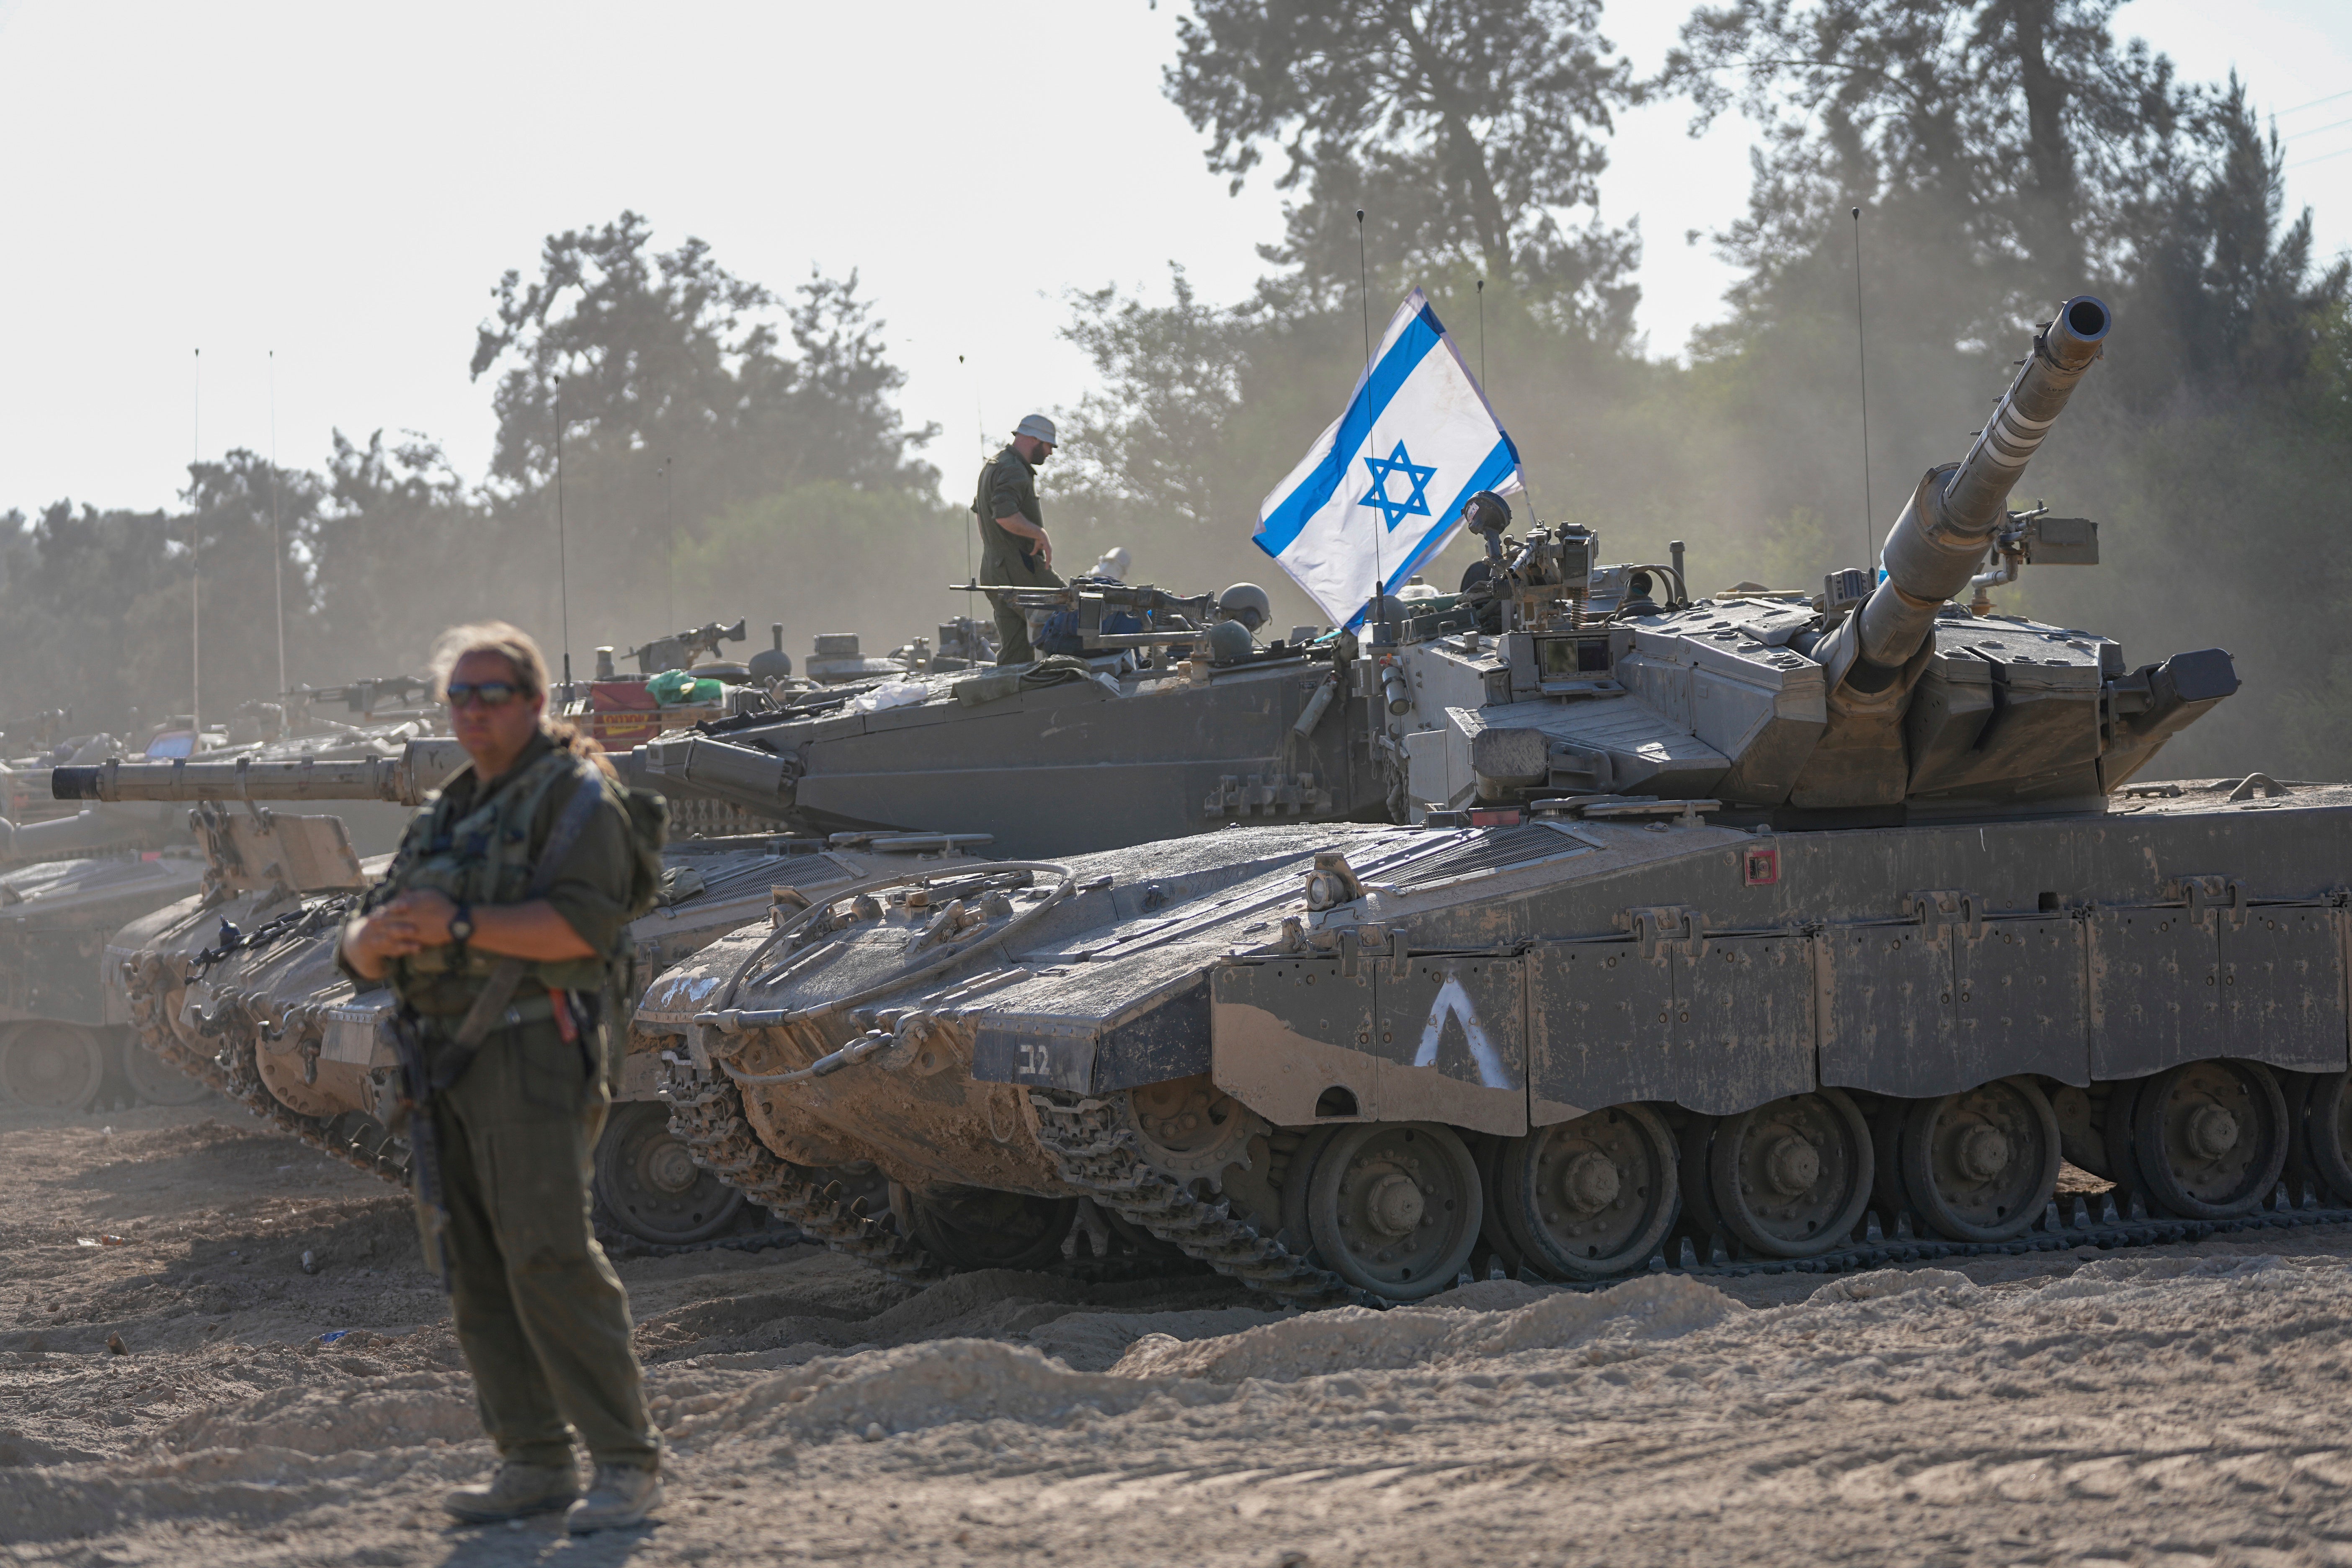 Israeli soldiers work on a tank at a staging area near the border with the Gaza Strip